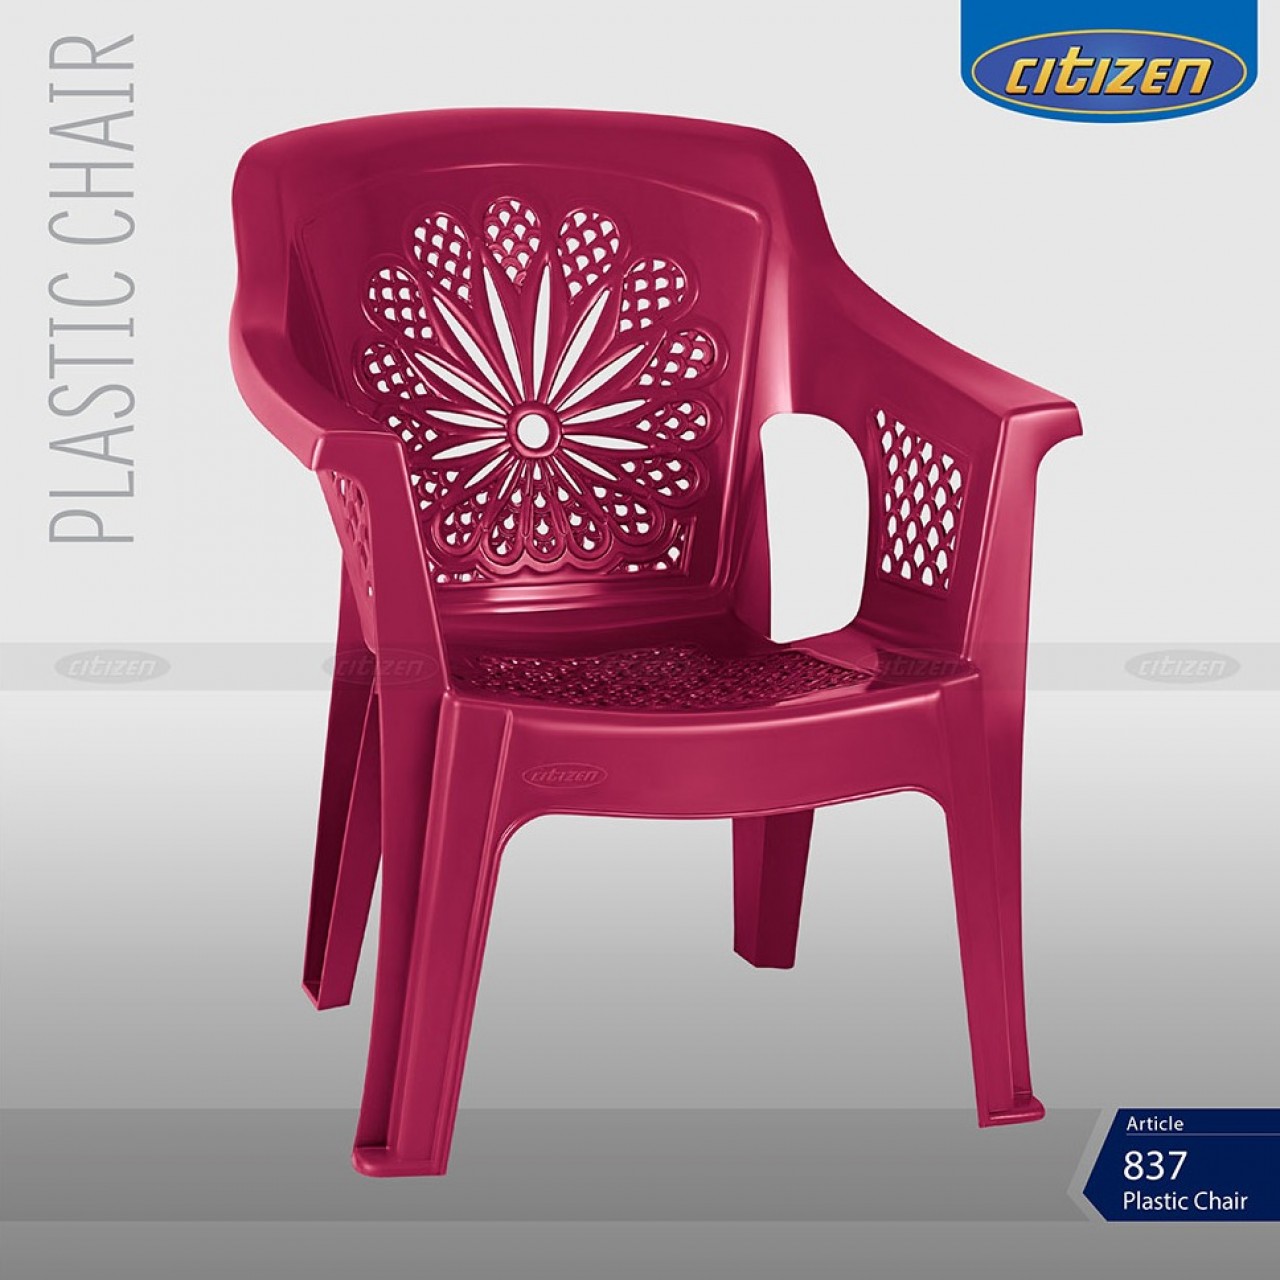 Citizen 837 Plastic Crystal & Regular Chair With Arms - Home Furniture